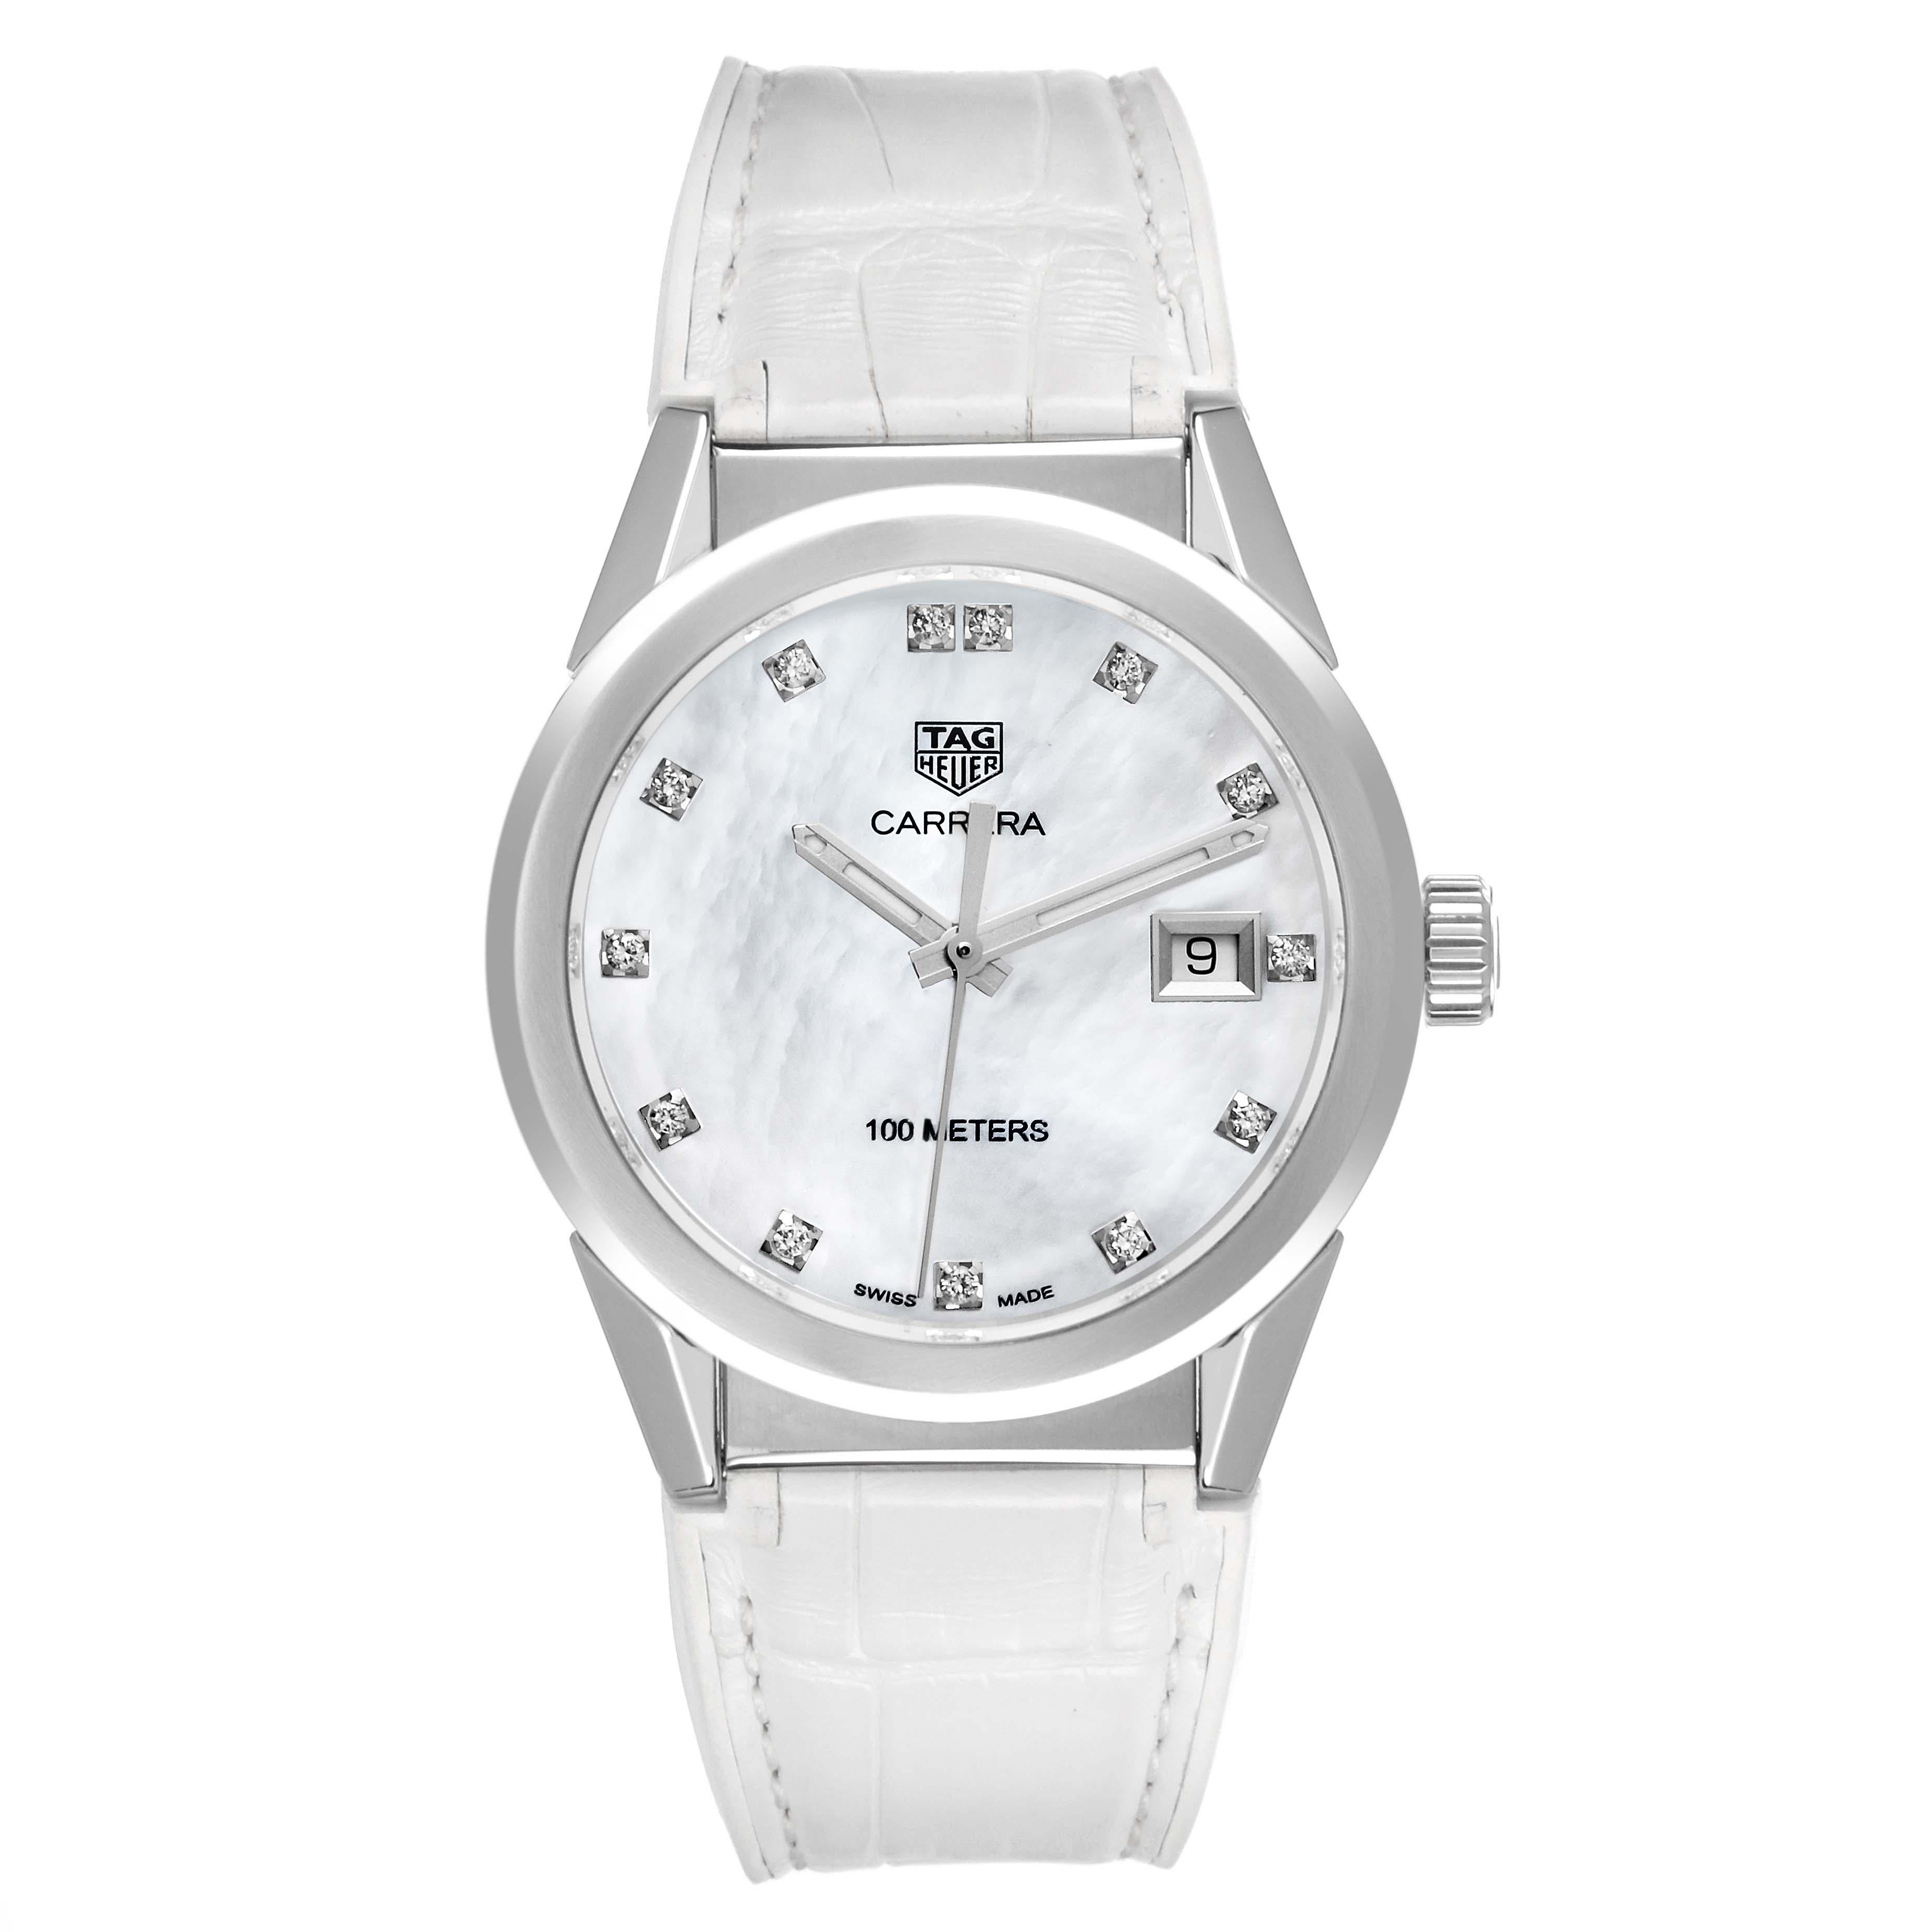 TAG Heuer Carrera Mother Of Pearl Diamond Dial Steel Ladies Watch WBG1312 Box Card. Quartz movement. Stainless steel case 36.0 mm in diameter. Stainless steel bezel. Scratch resistant sapphire crystal. Mother of pearl dial with original Tag Heuer